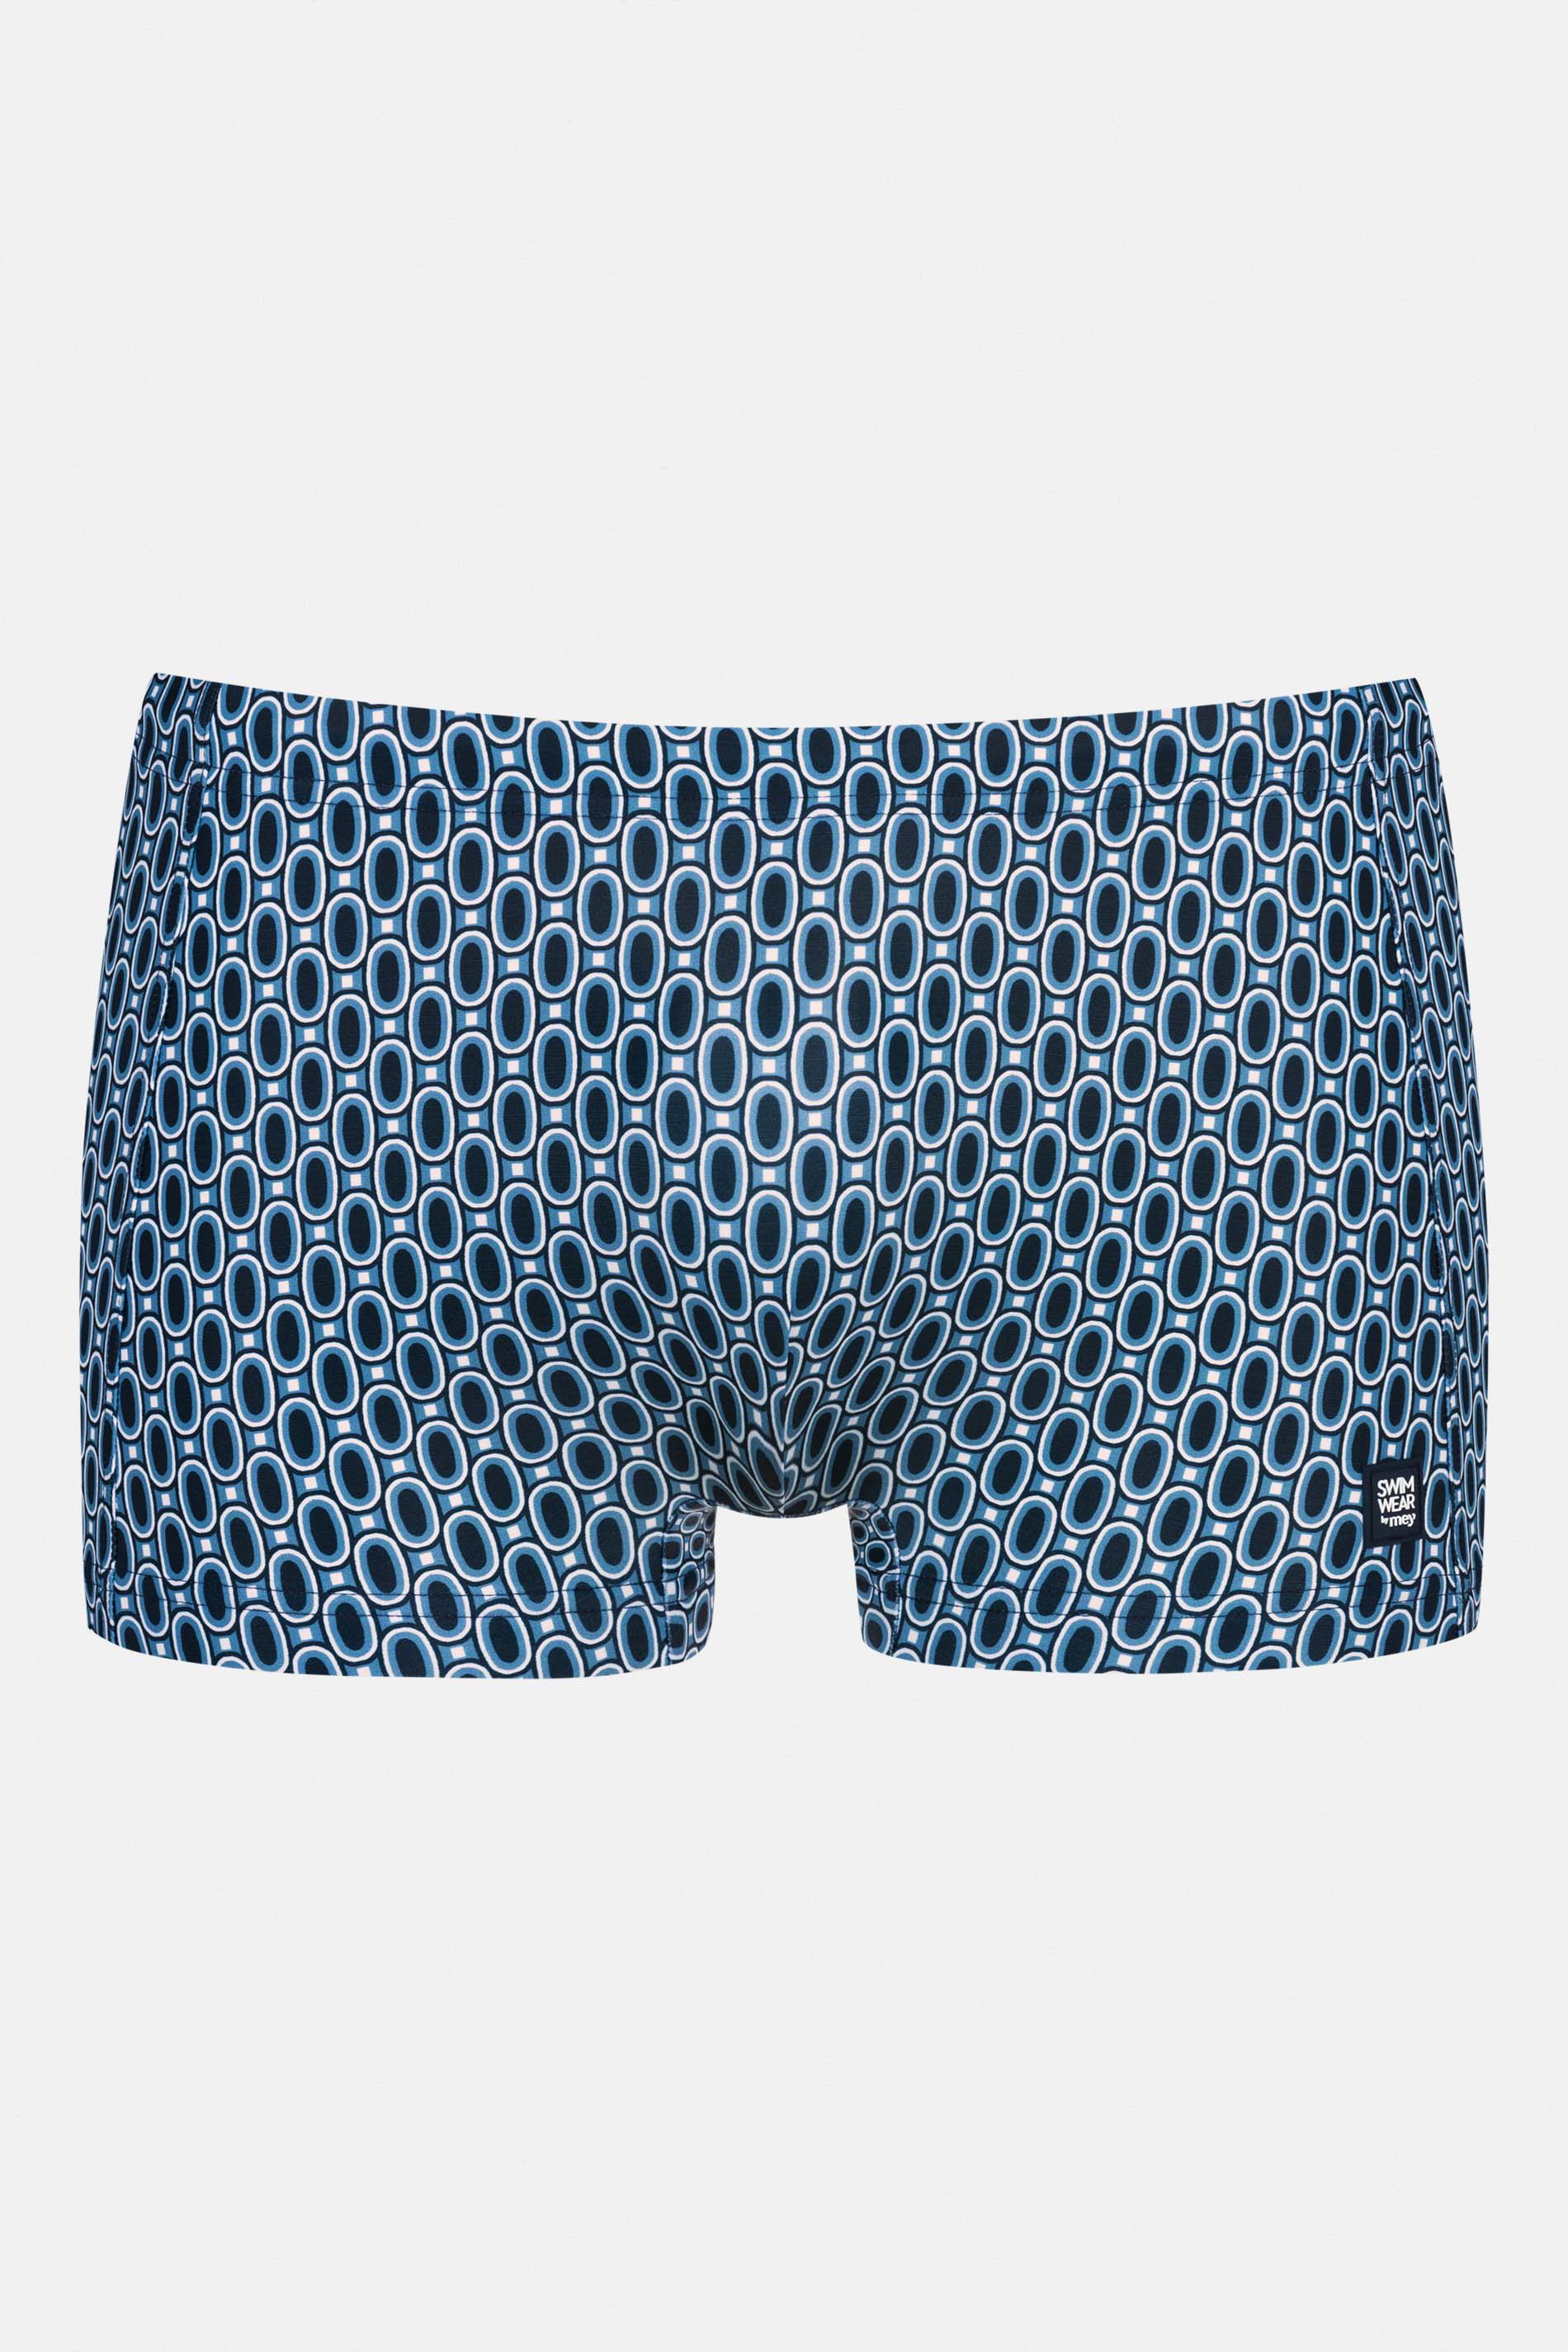 Zwemshorty Serie Retro Linked Uitknippen | mey®